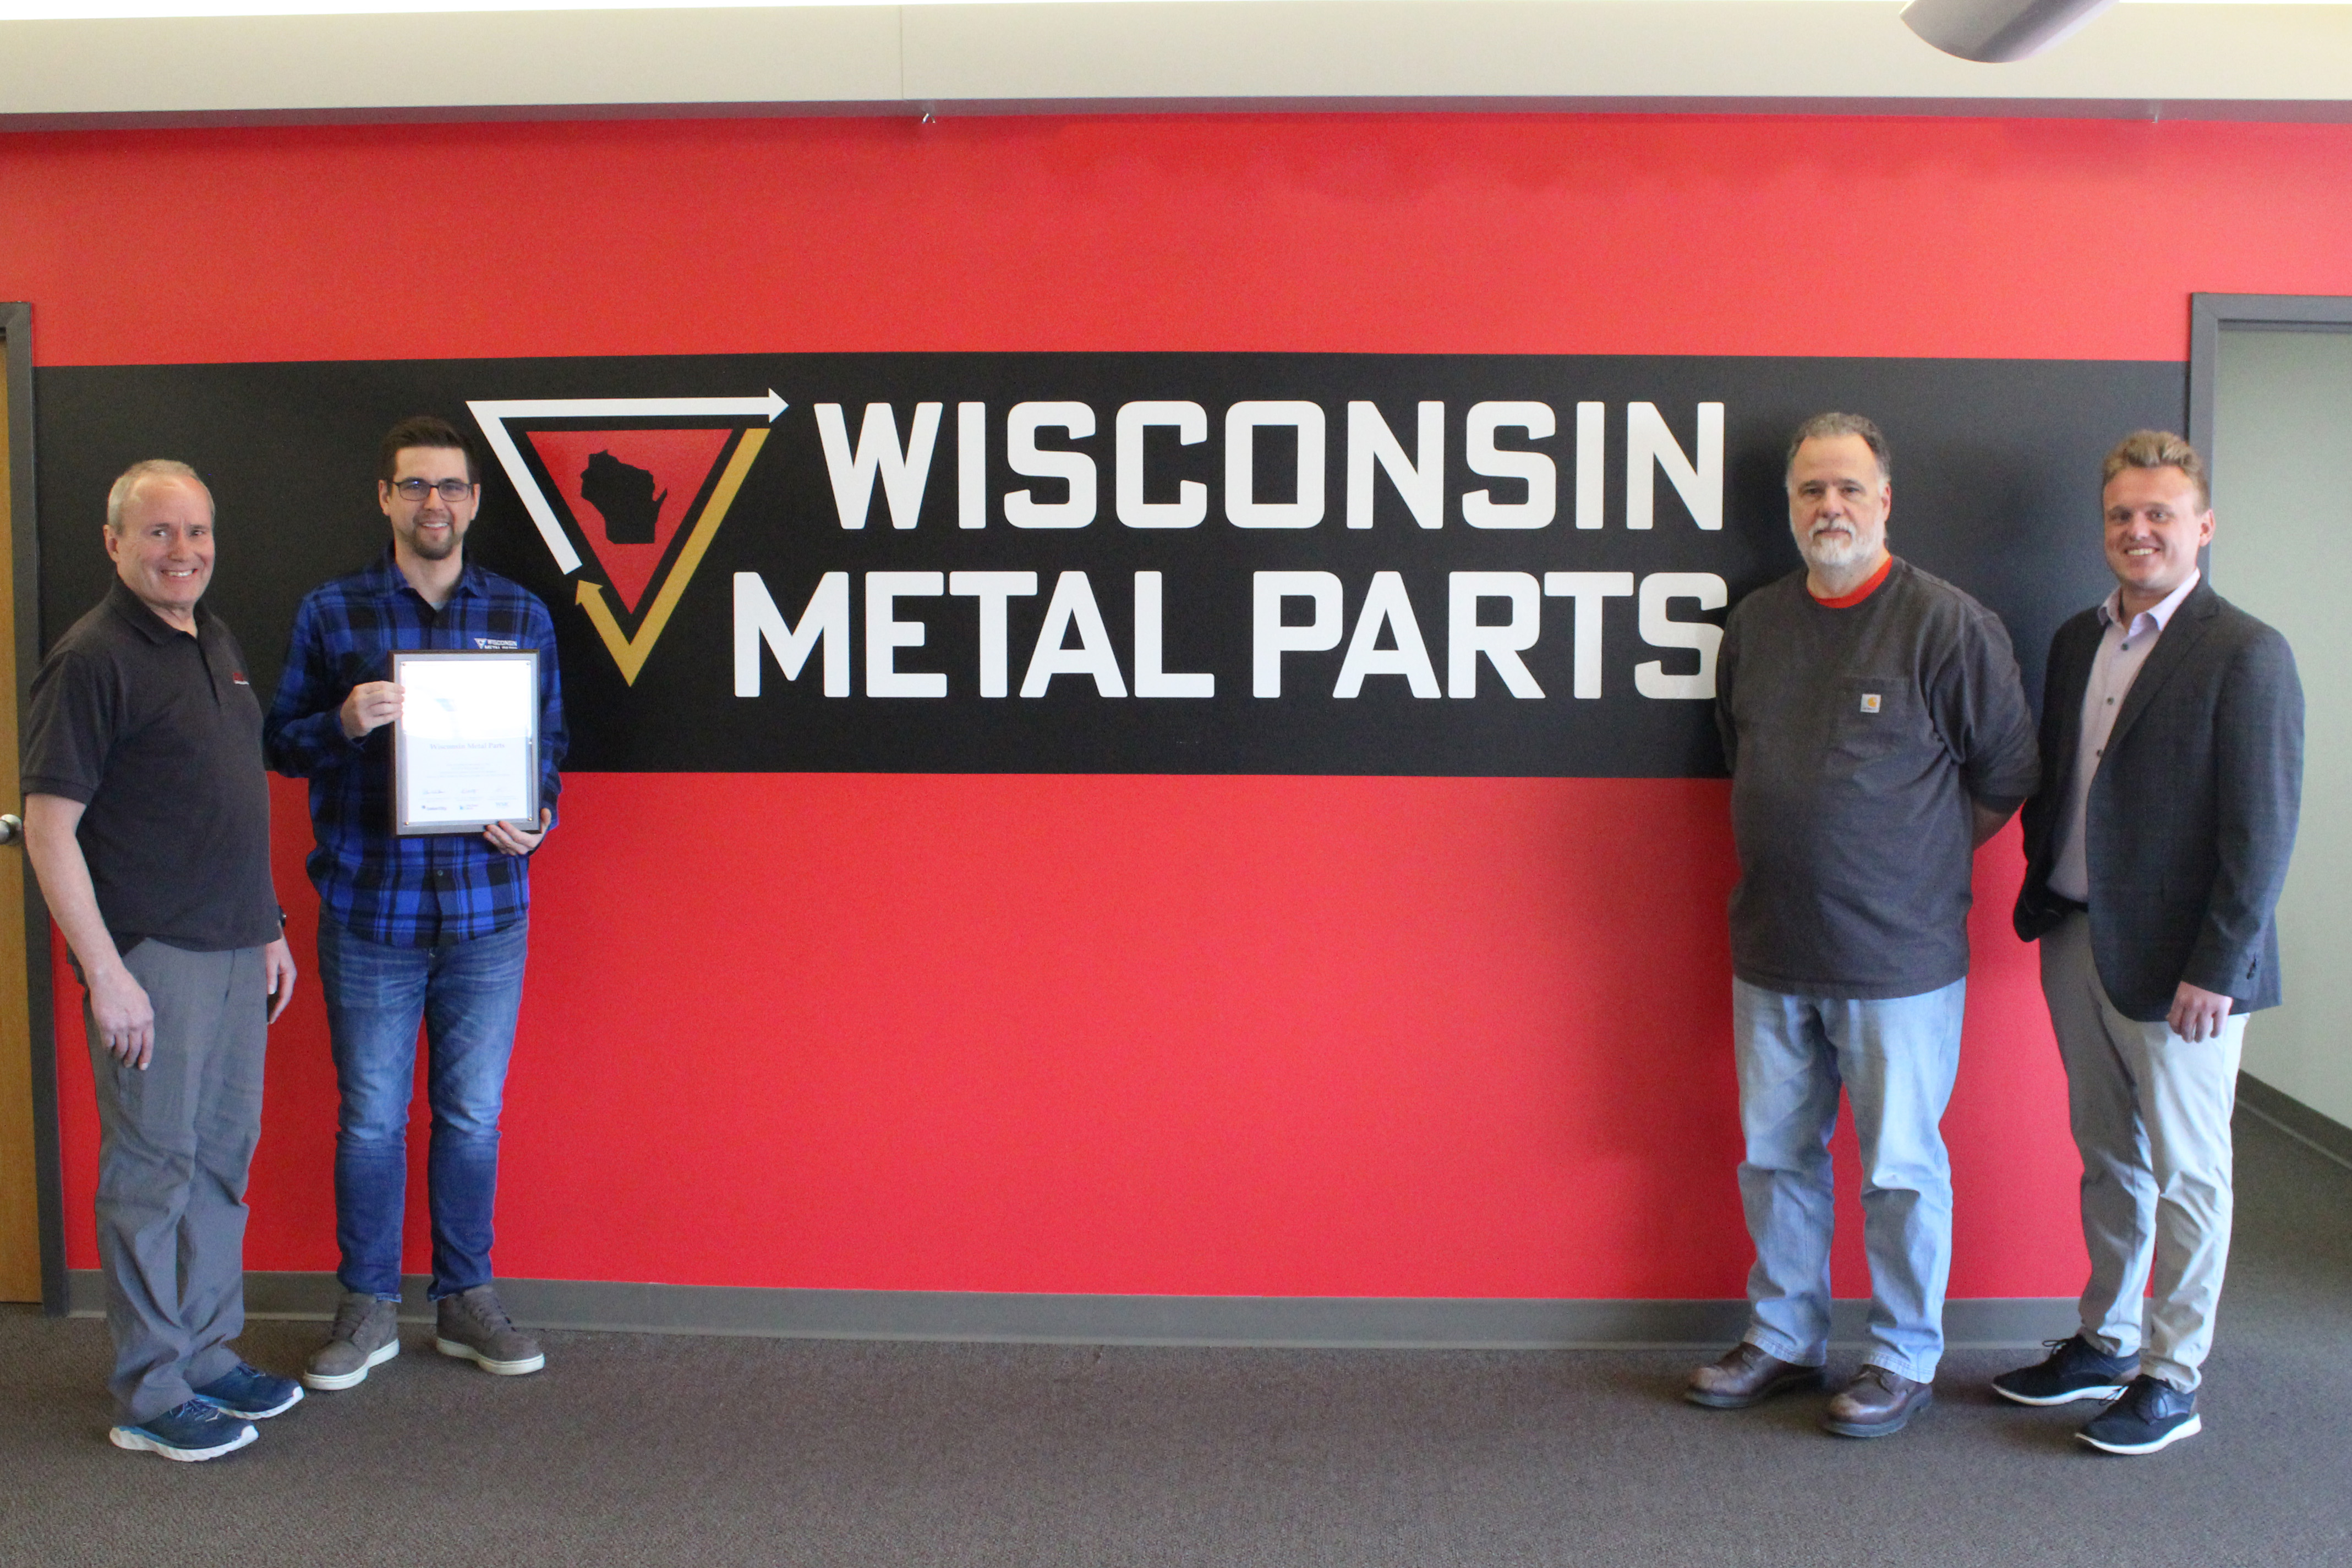 Wisconsin Manufacturer of the Year